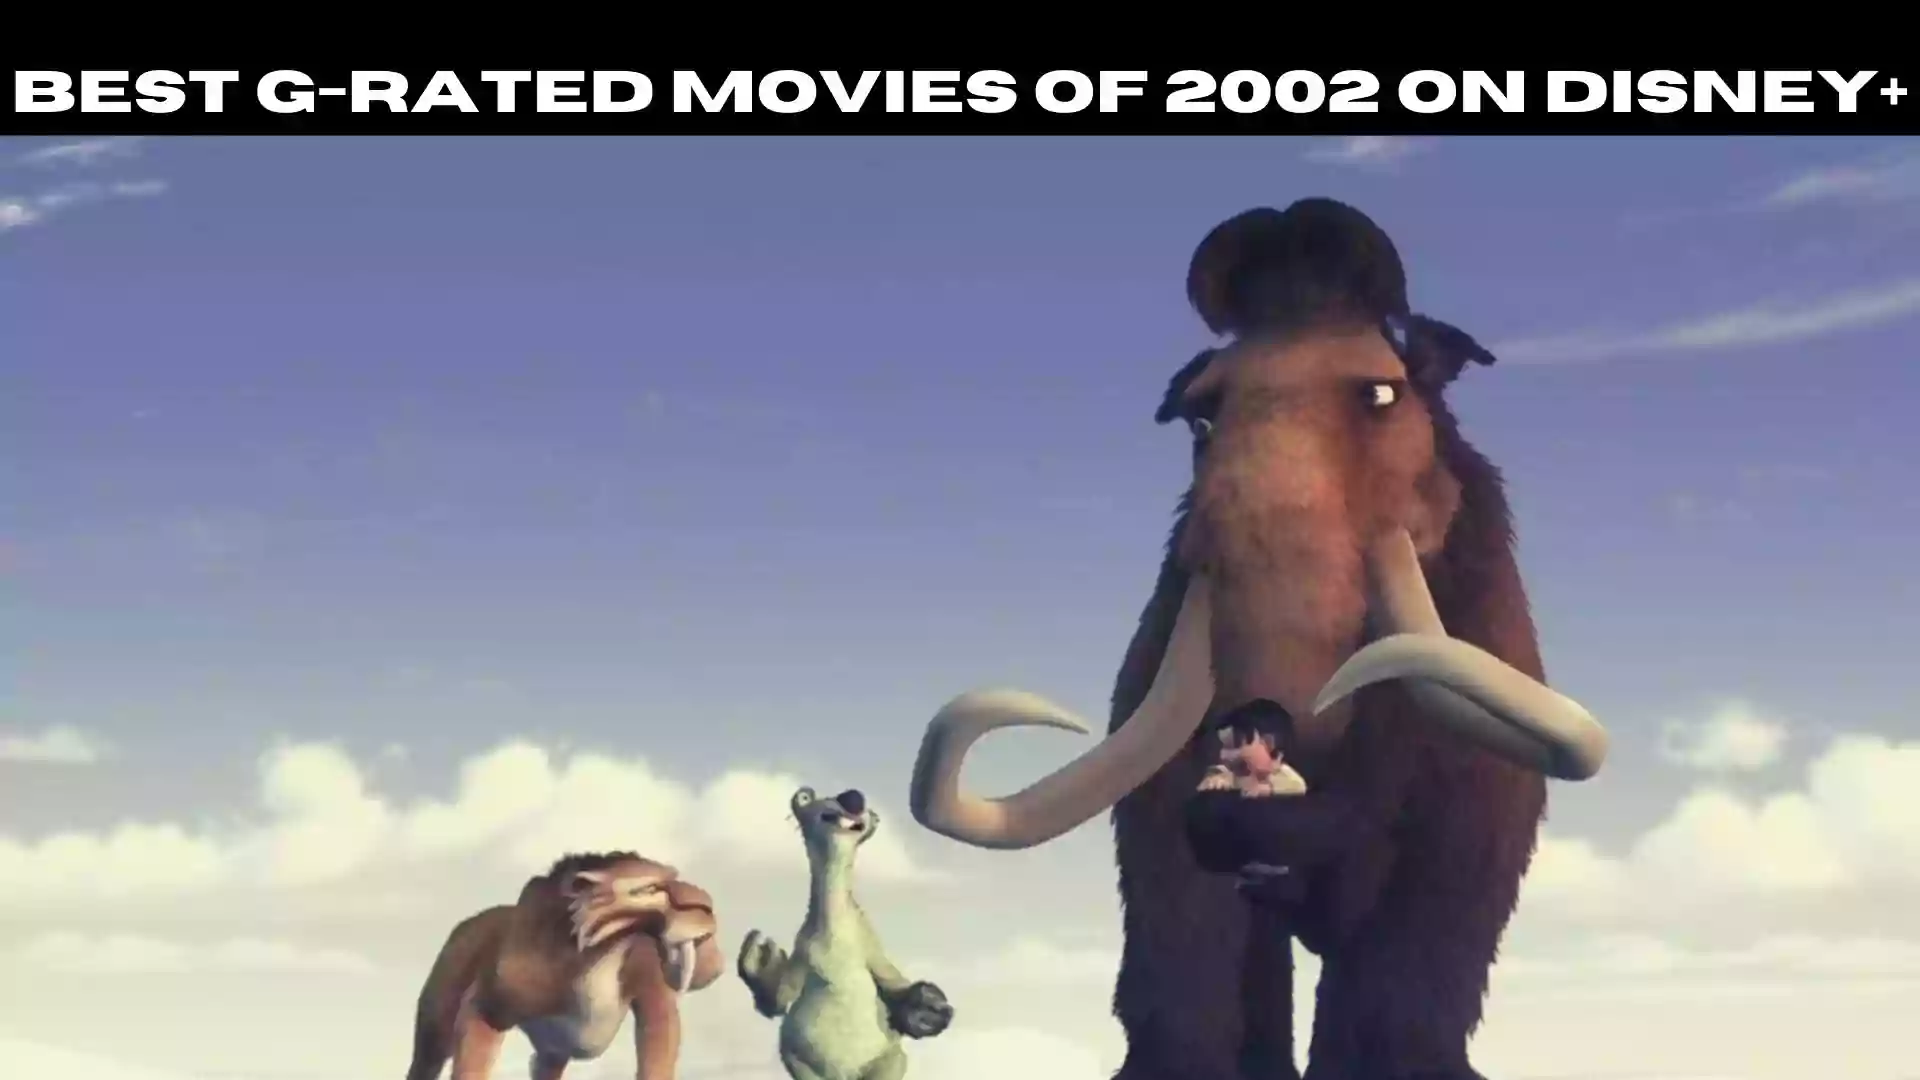 Best G-Rated Movies of 2002 on Disney+